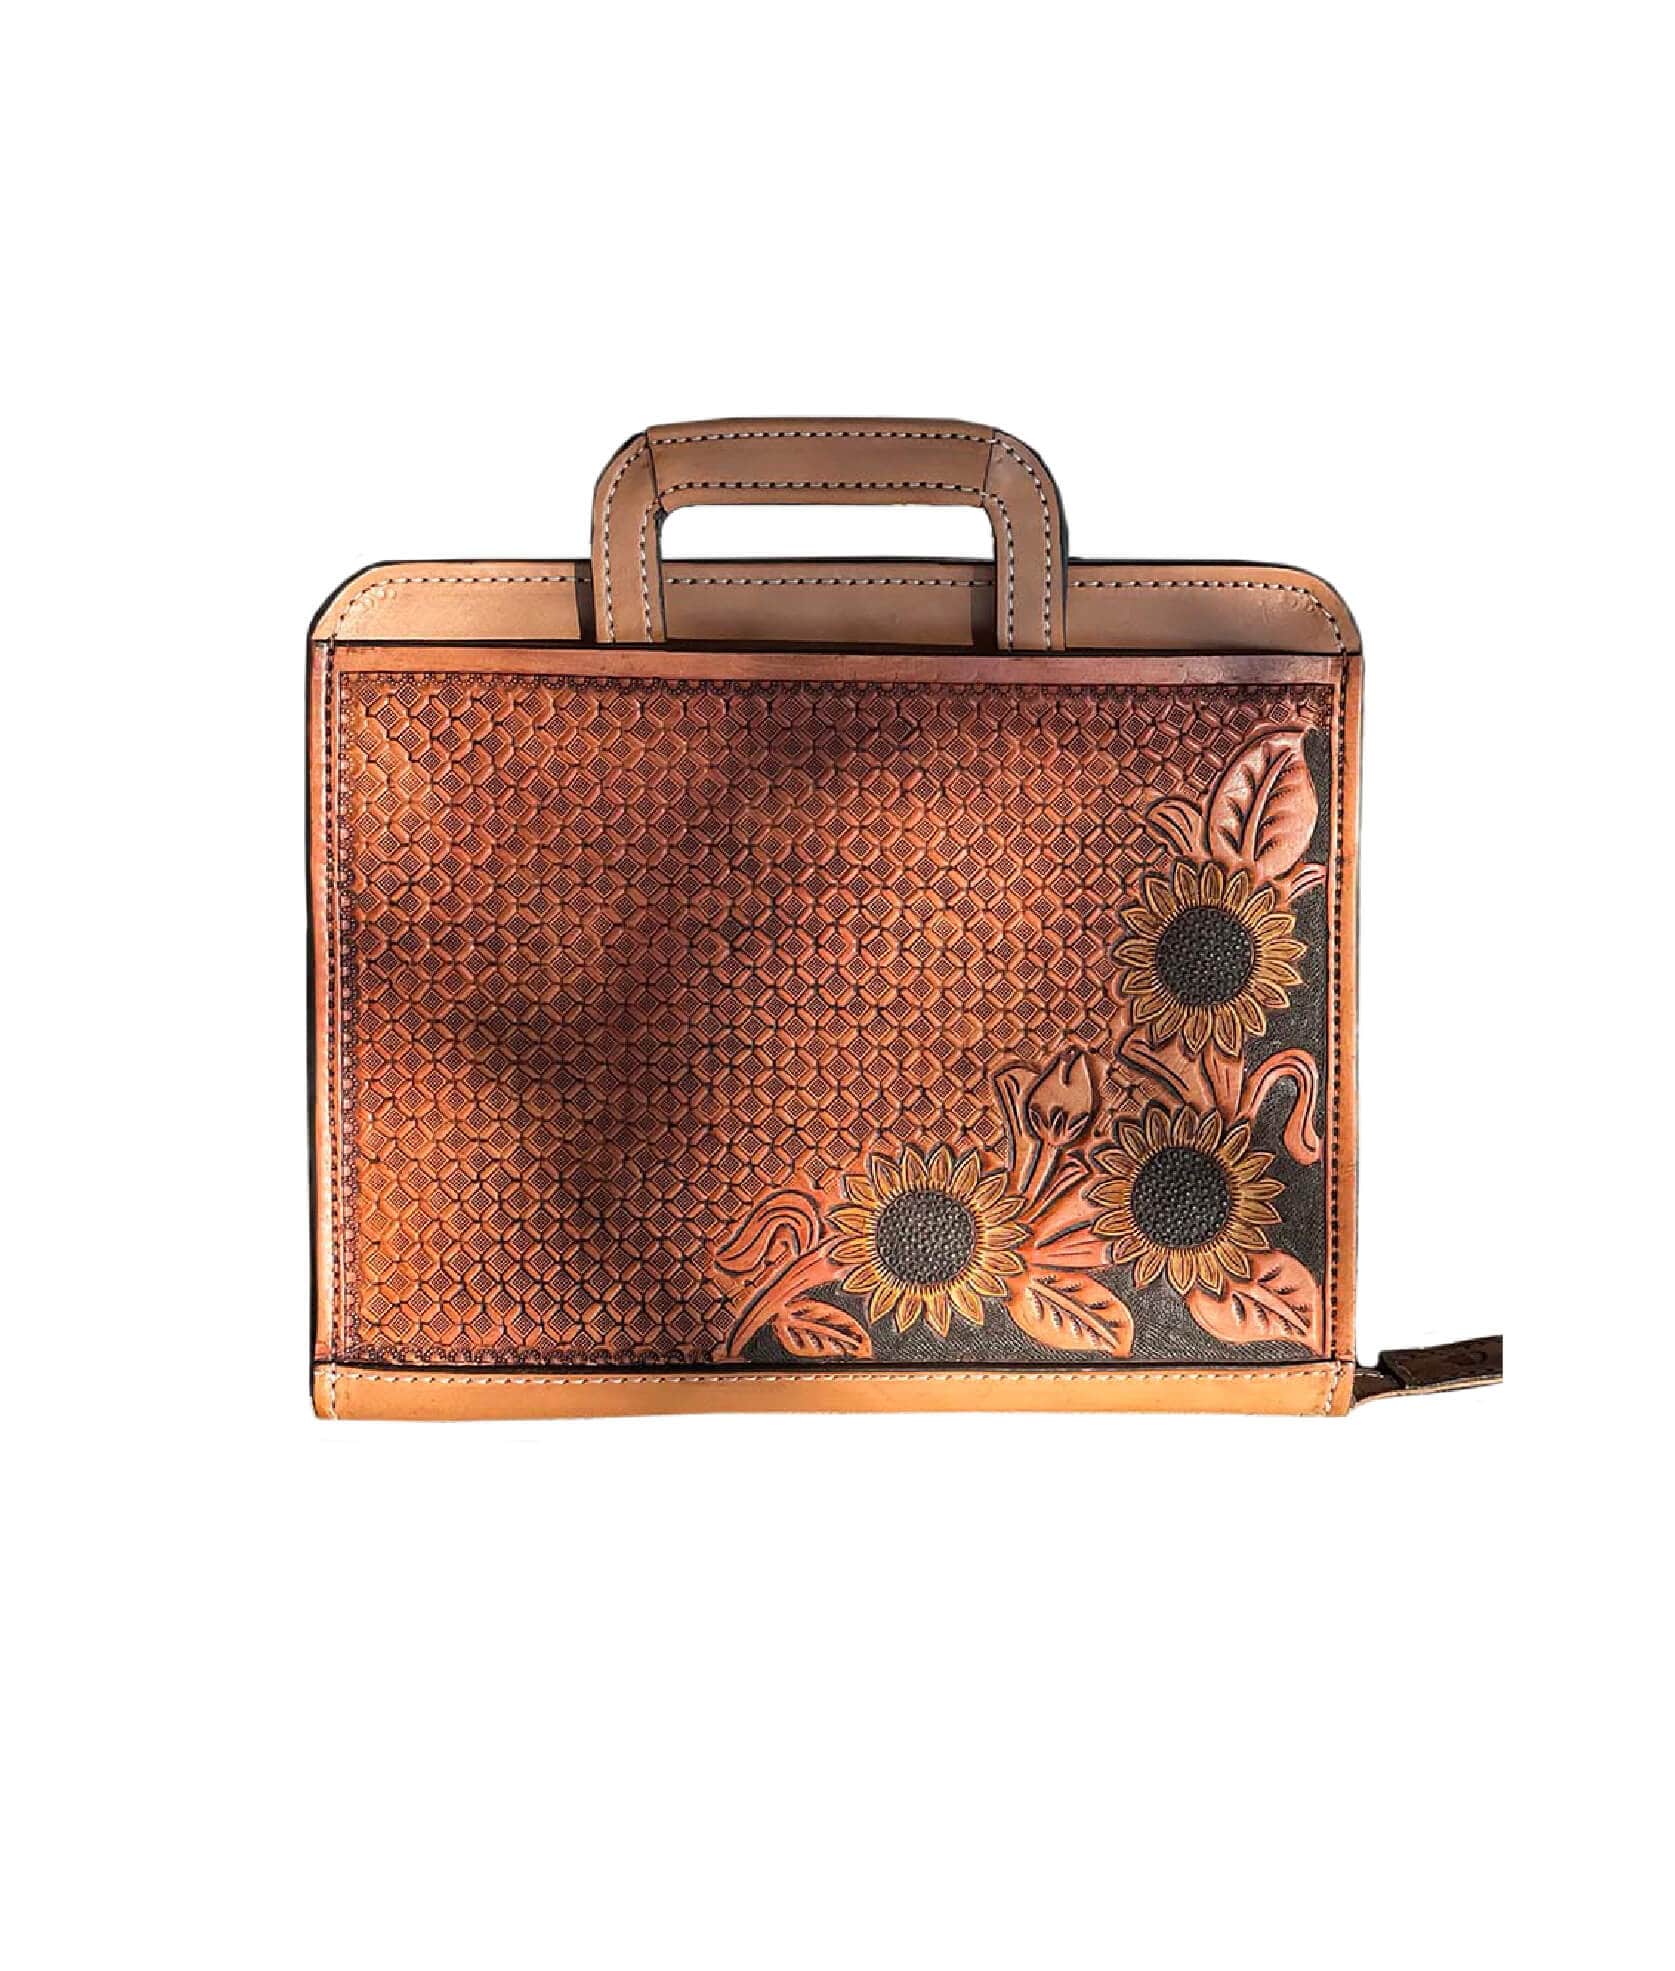 Alamo Saddlery Travel Cowboy Briefcase golden leather waffle and sunflower tooling with background paint